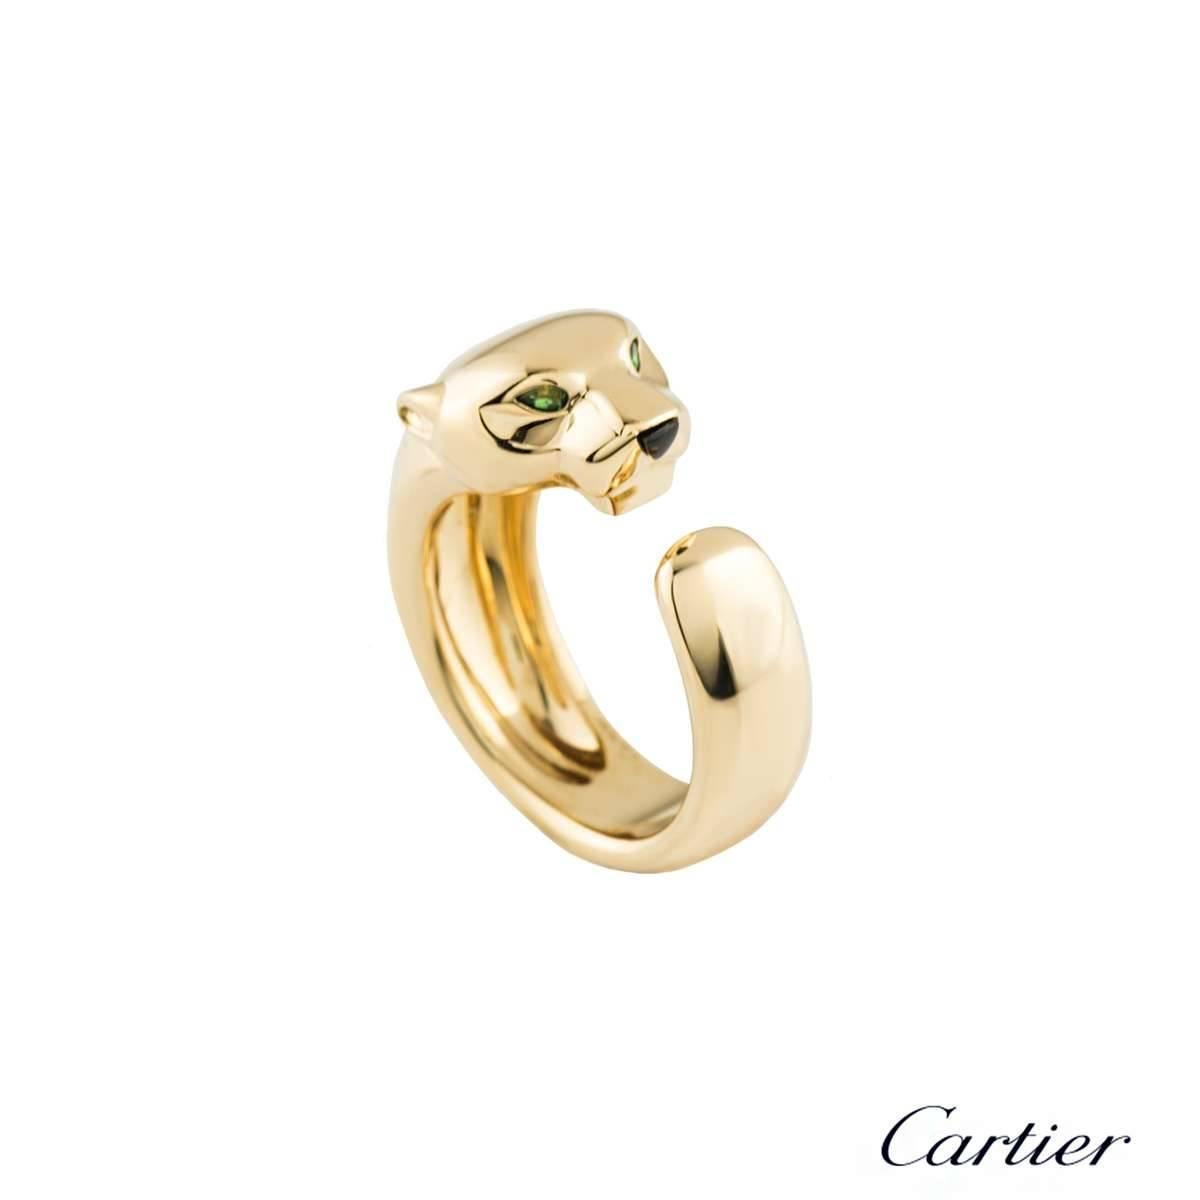 A gorgeous 18k yellow gold Cartier ring from the Panthere De Cartier collection. The ring is composed of a panthere head motif, complimented with 2 tsavorite stones set as the eyes and an onyx as the nose. The panthere body wraps around three